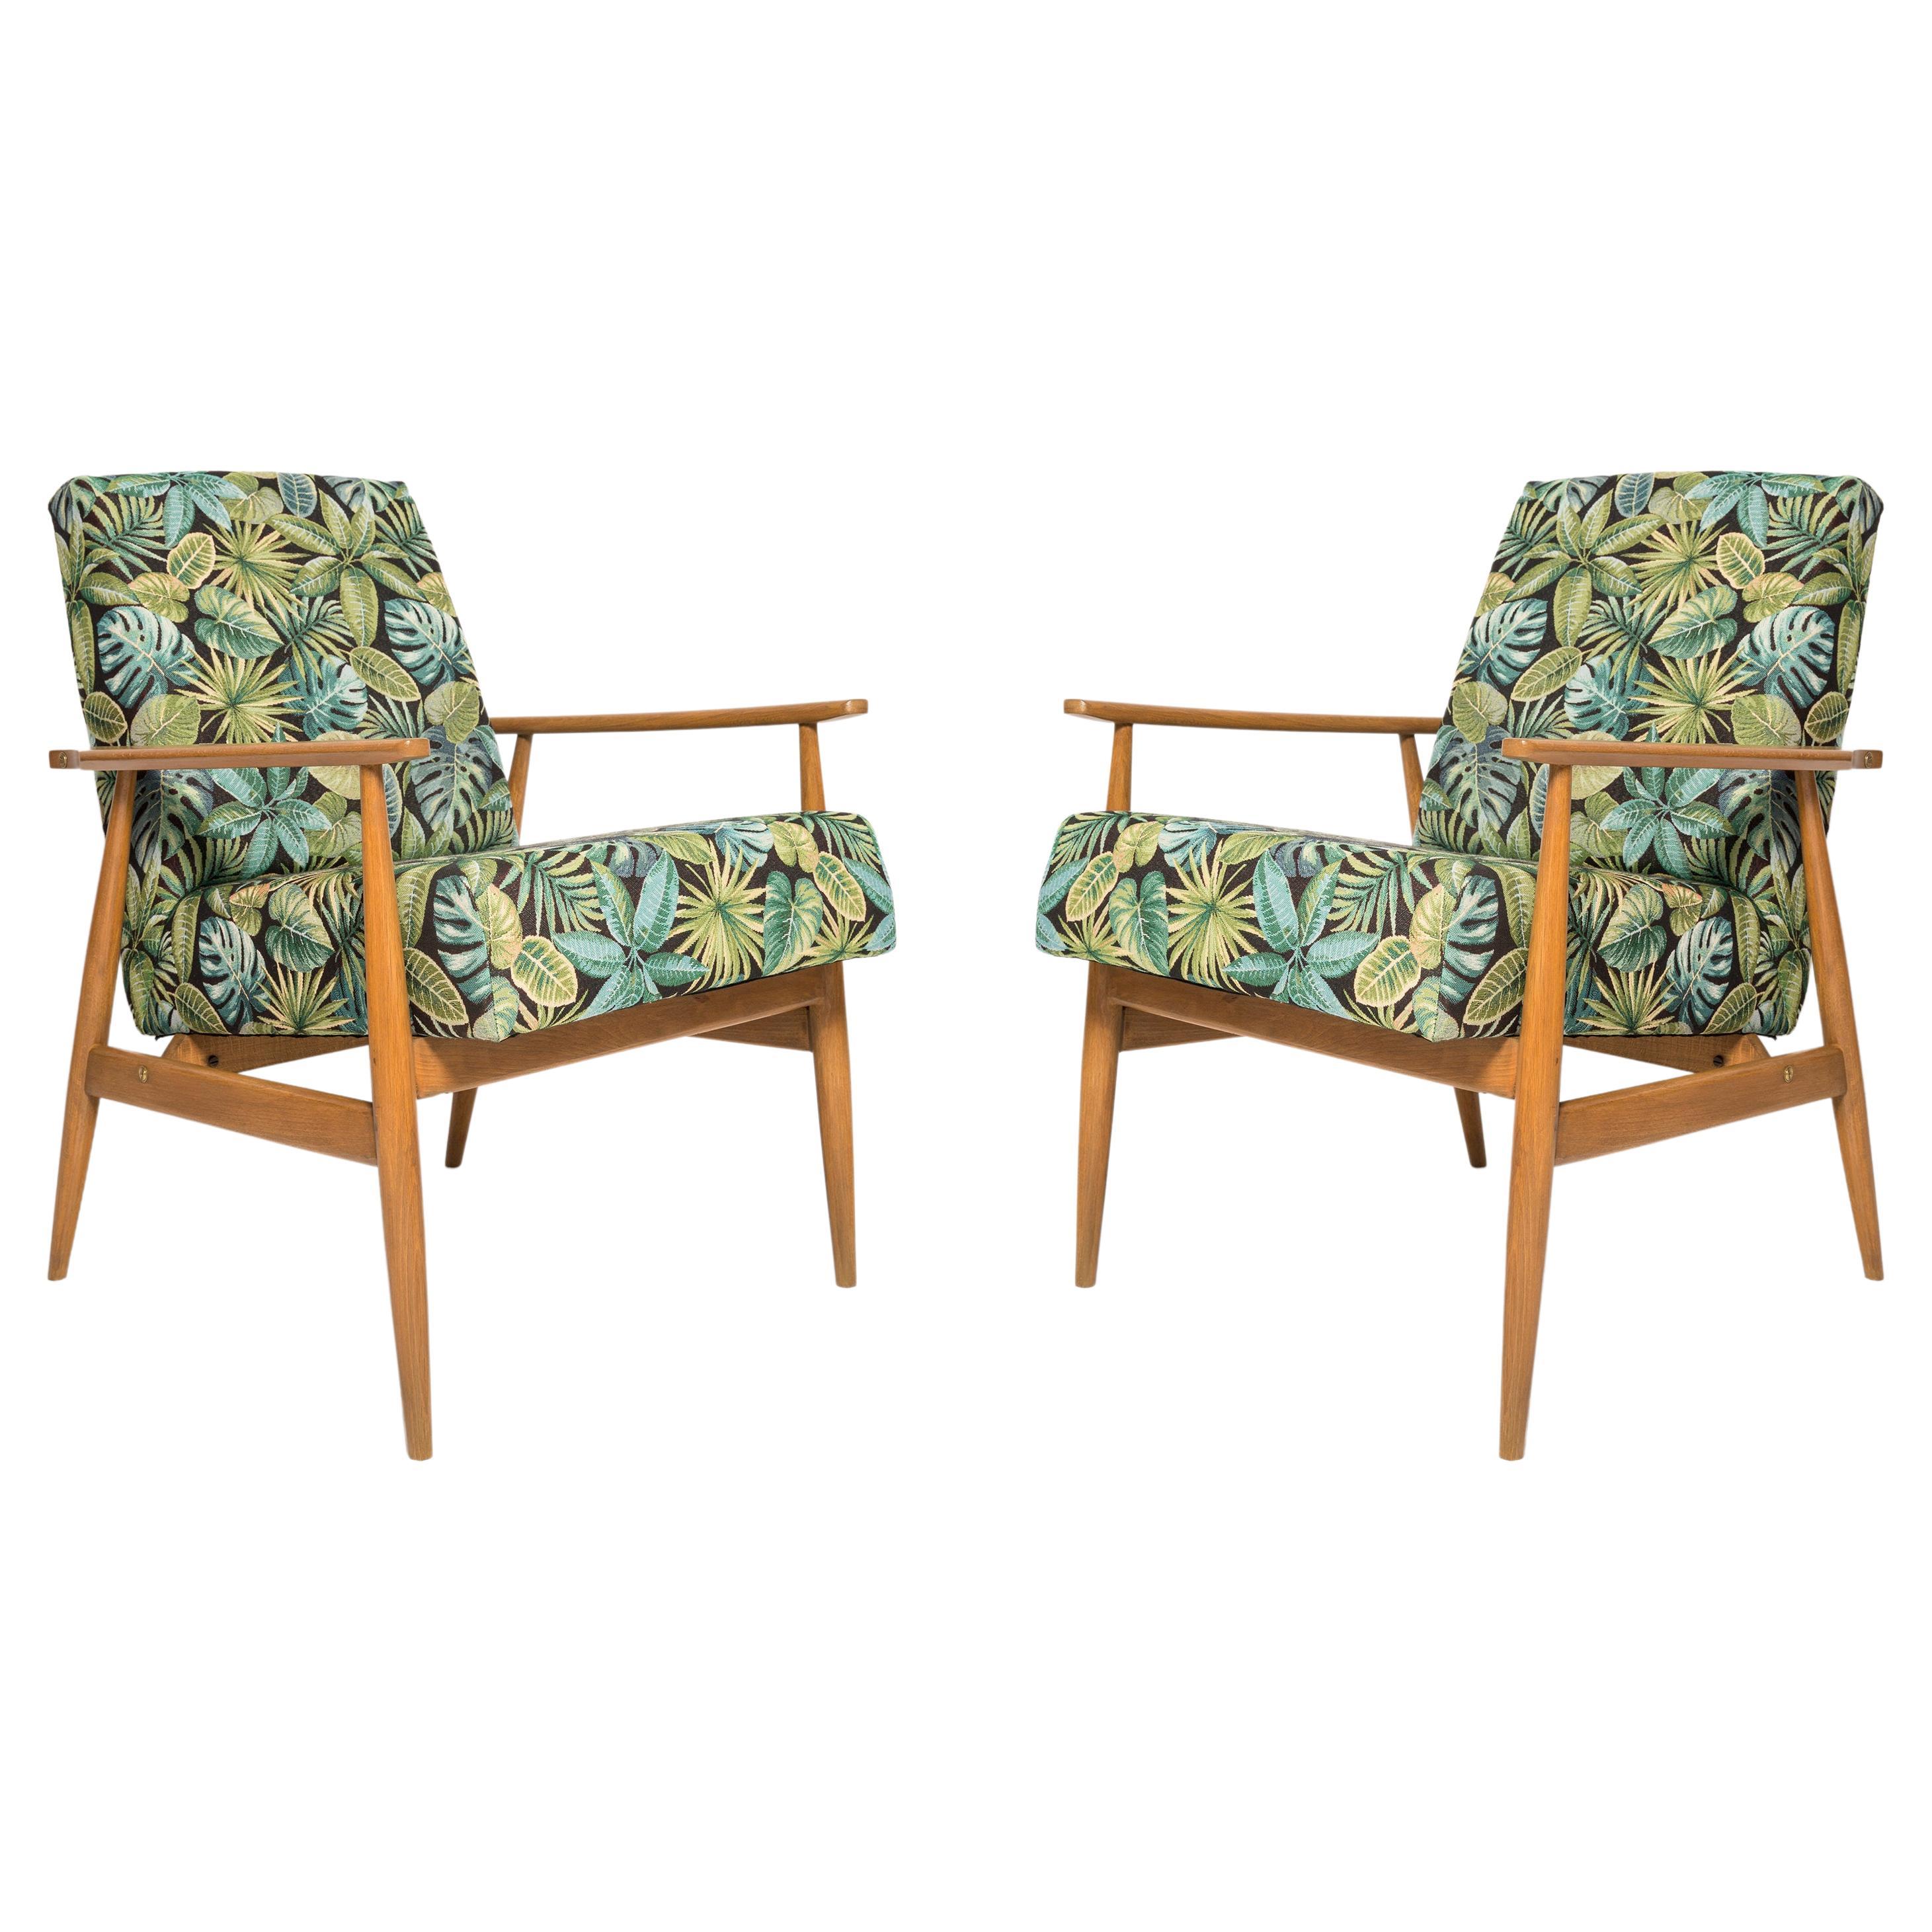 Pair of Mid-Century Green Leaves Jacquard Dante Armchairs, H. Lis, 1960s For Sale